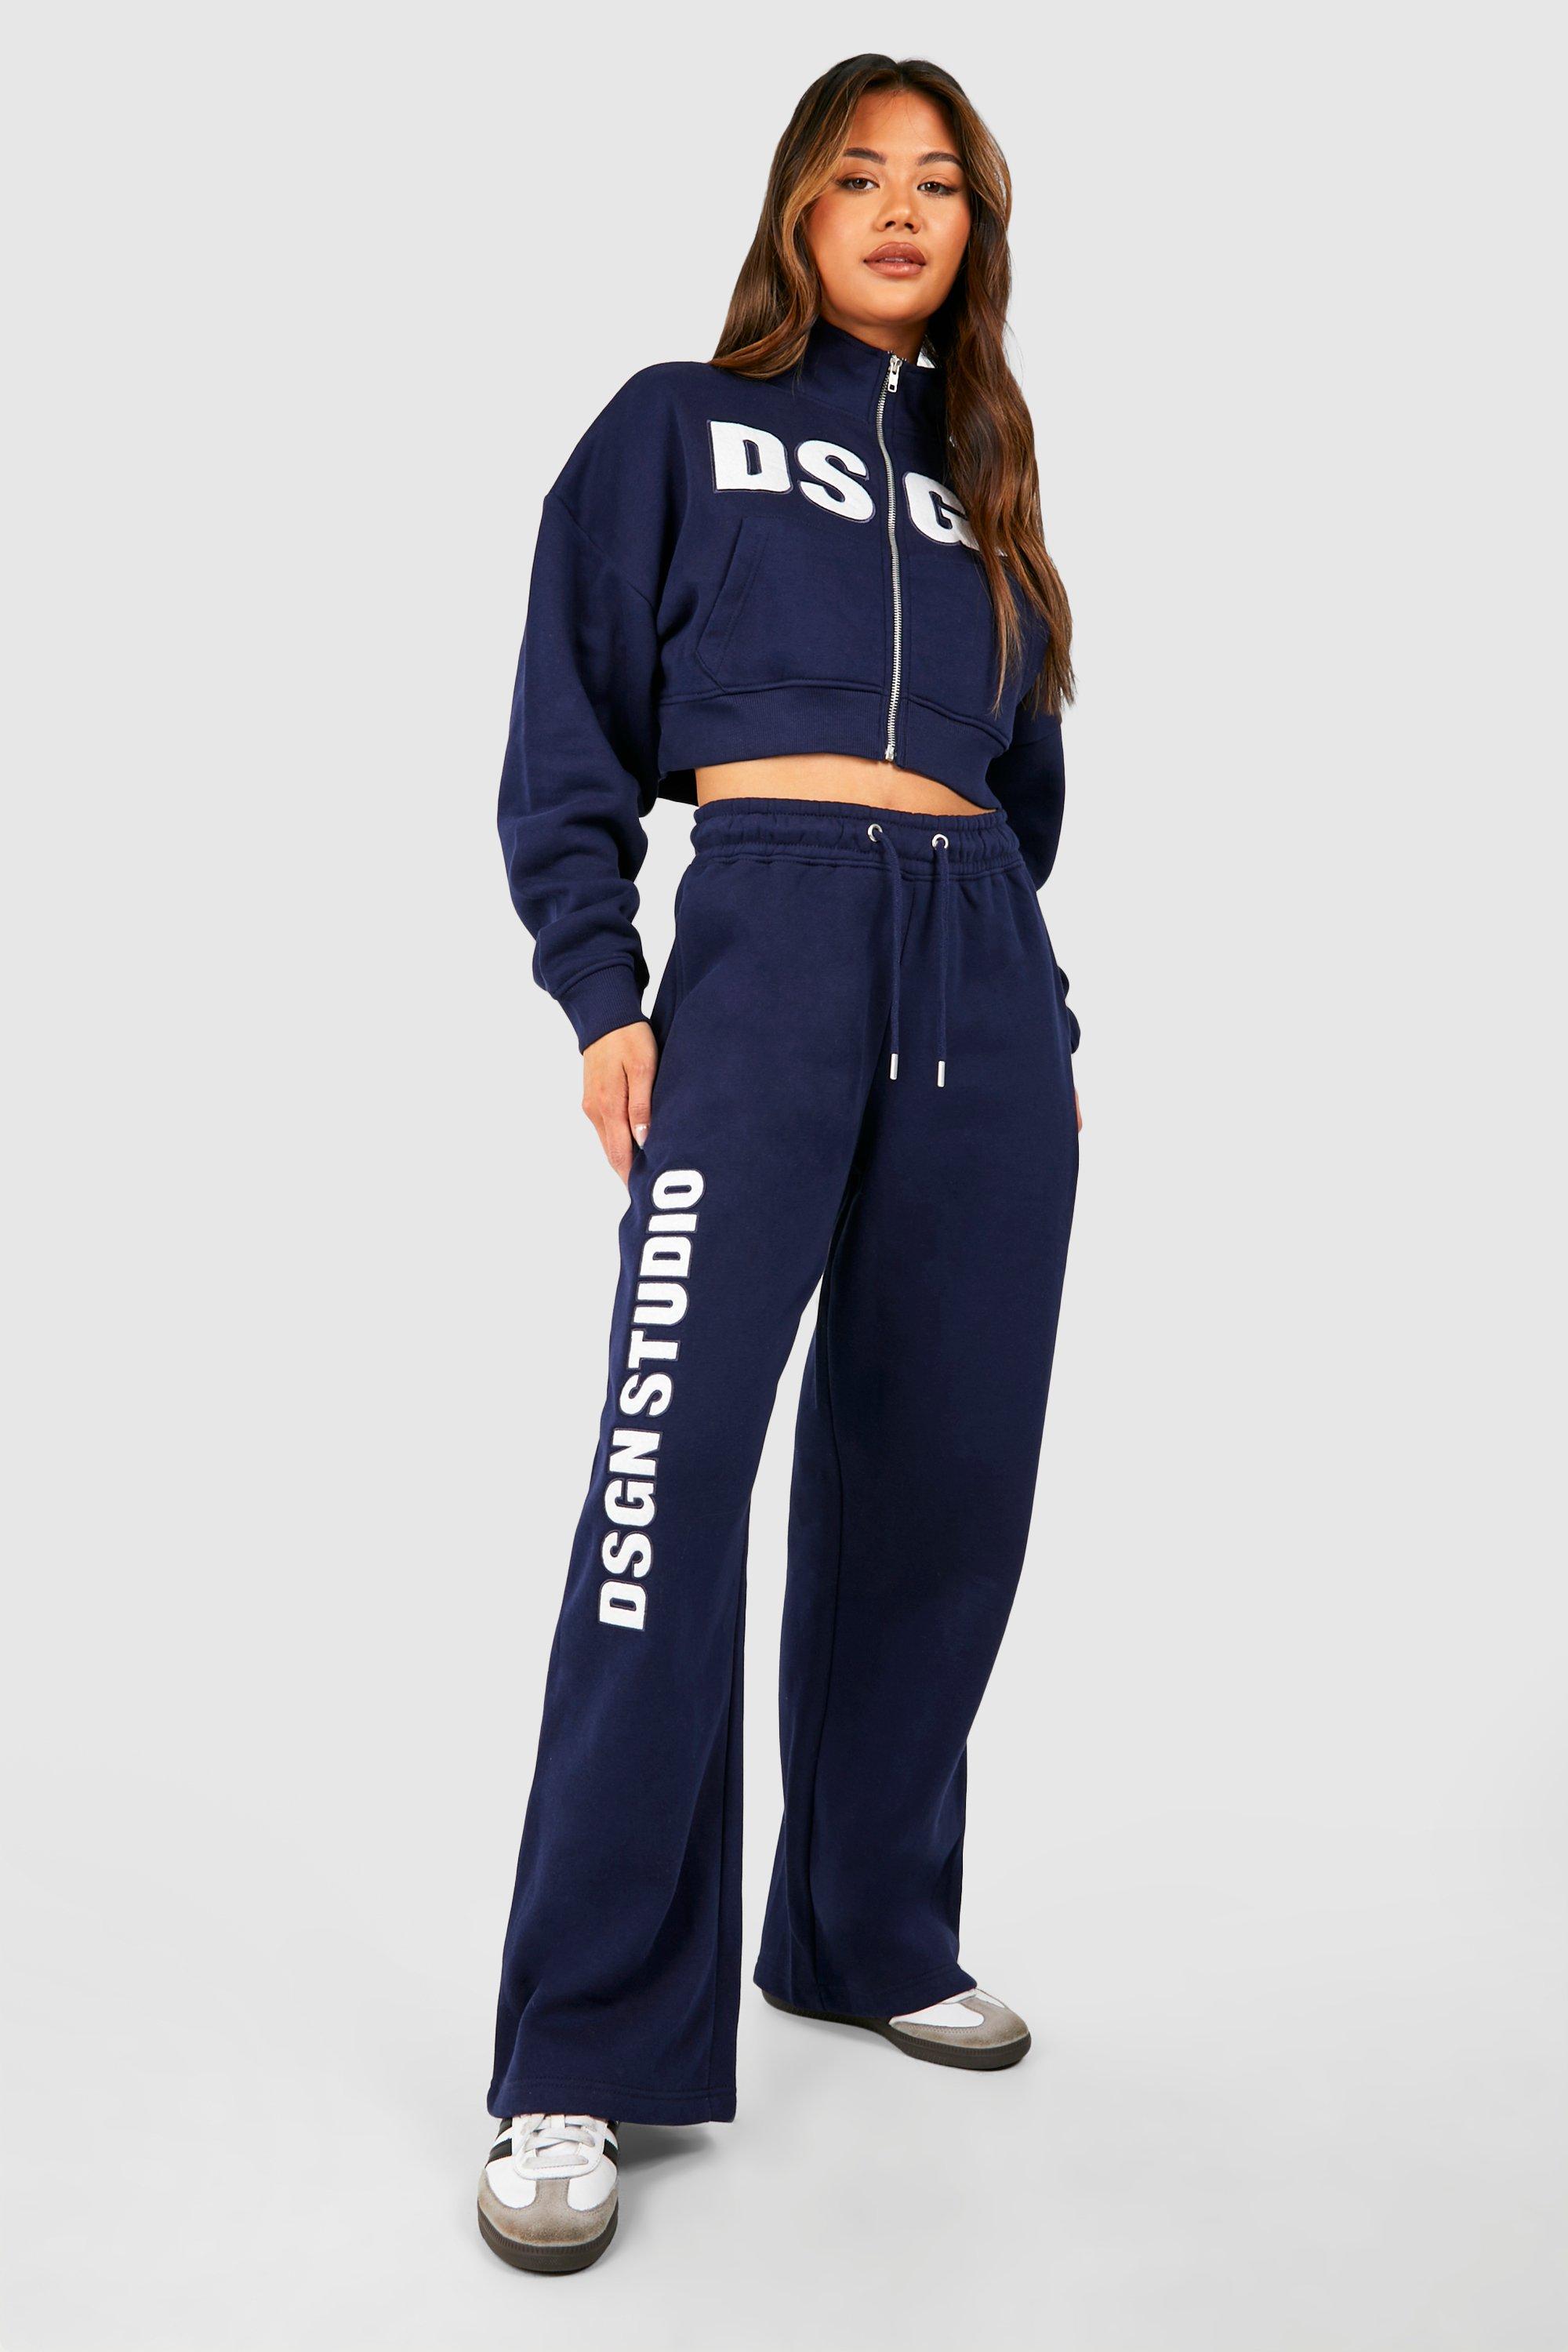 Image of Dsgn Studio Embroidered Cropped Sweatshirt Tracksuit, Navy